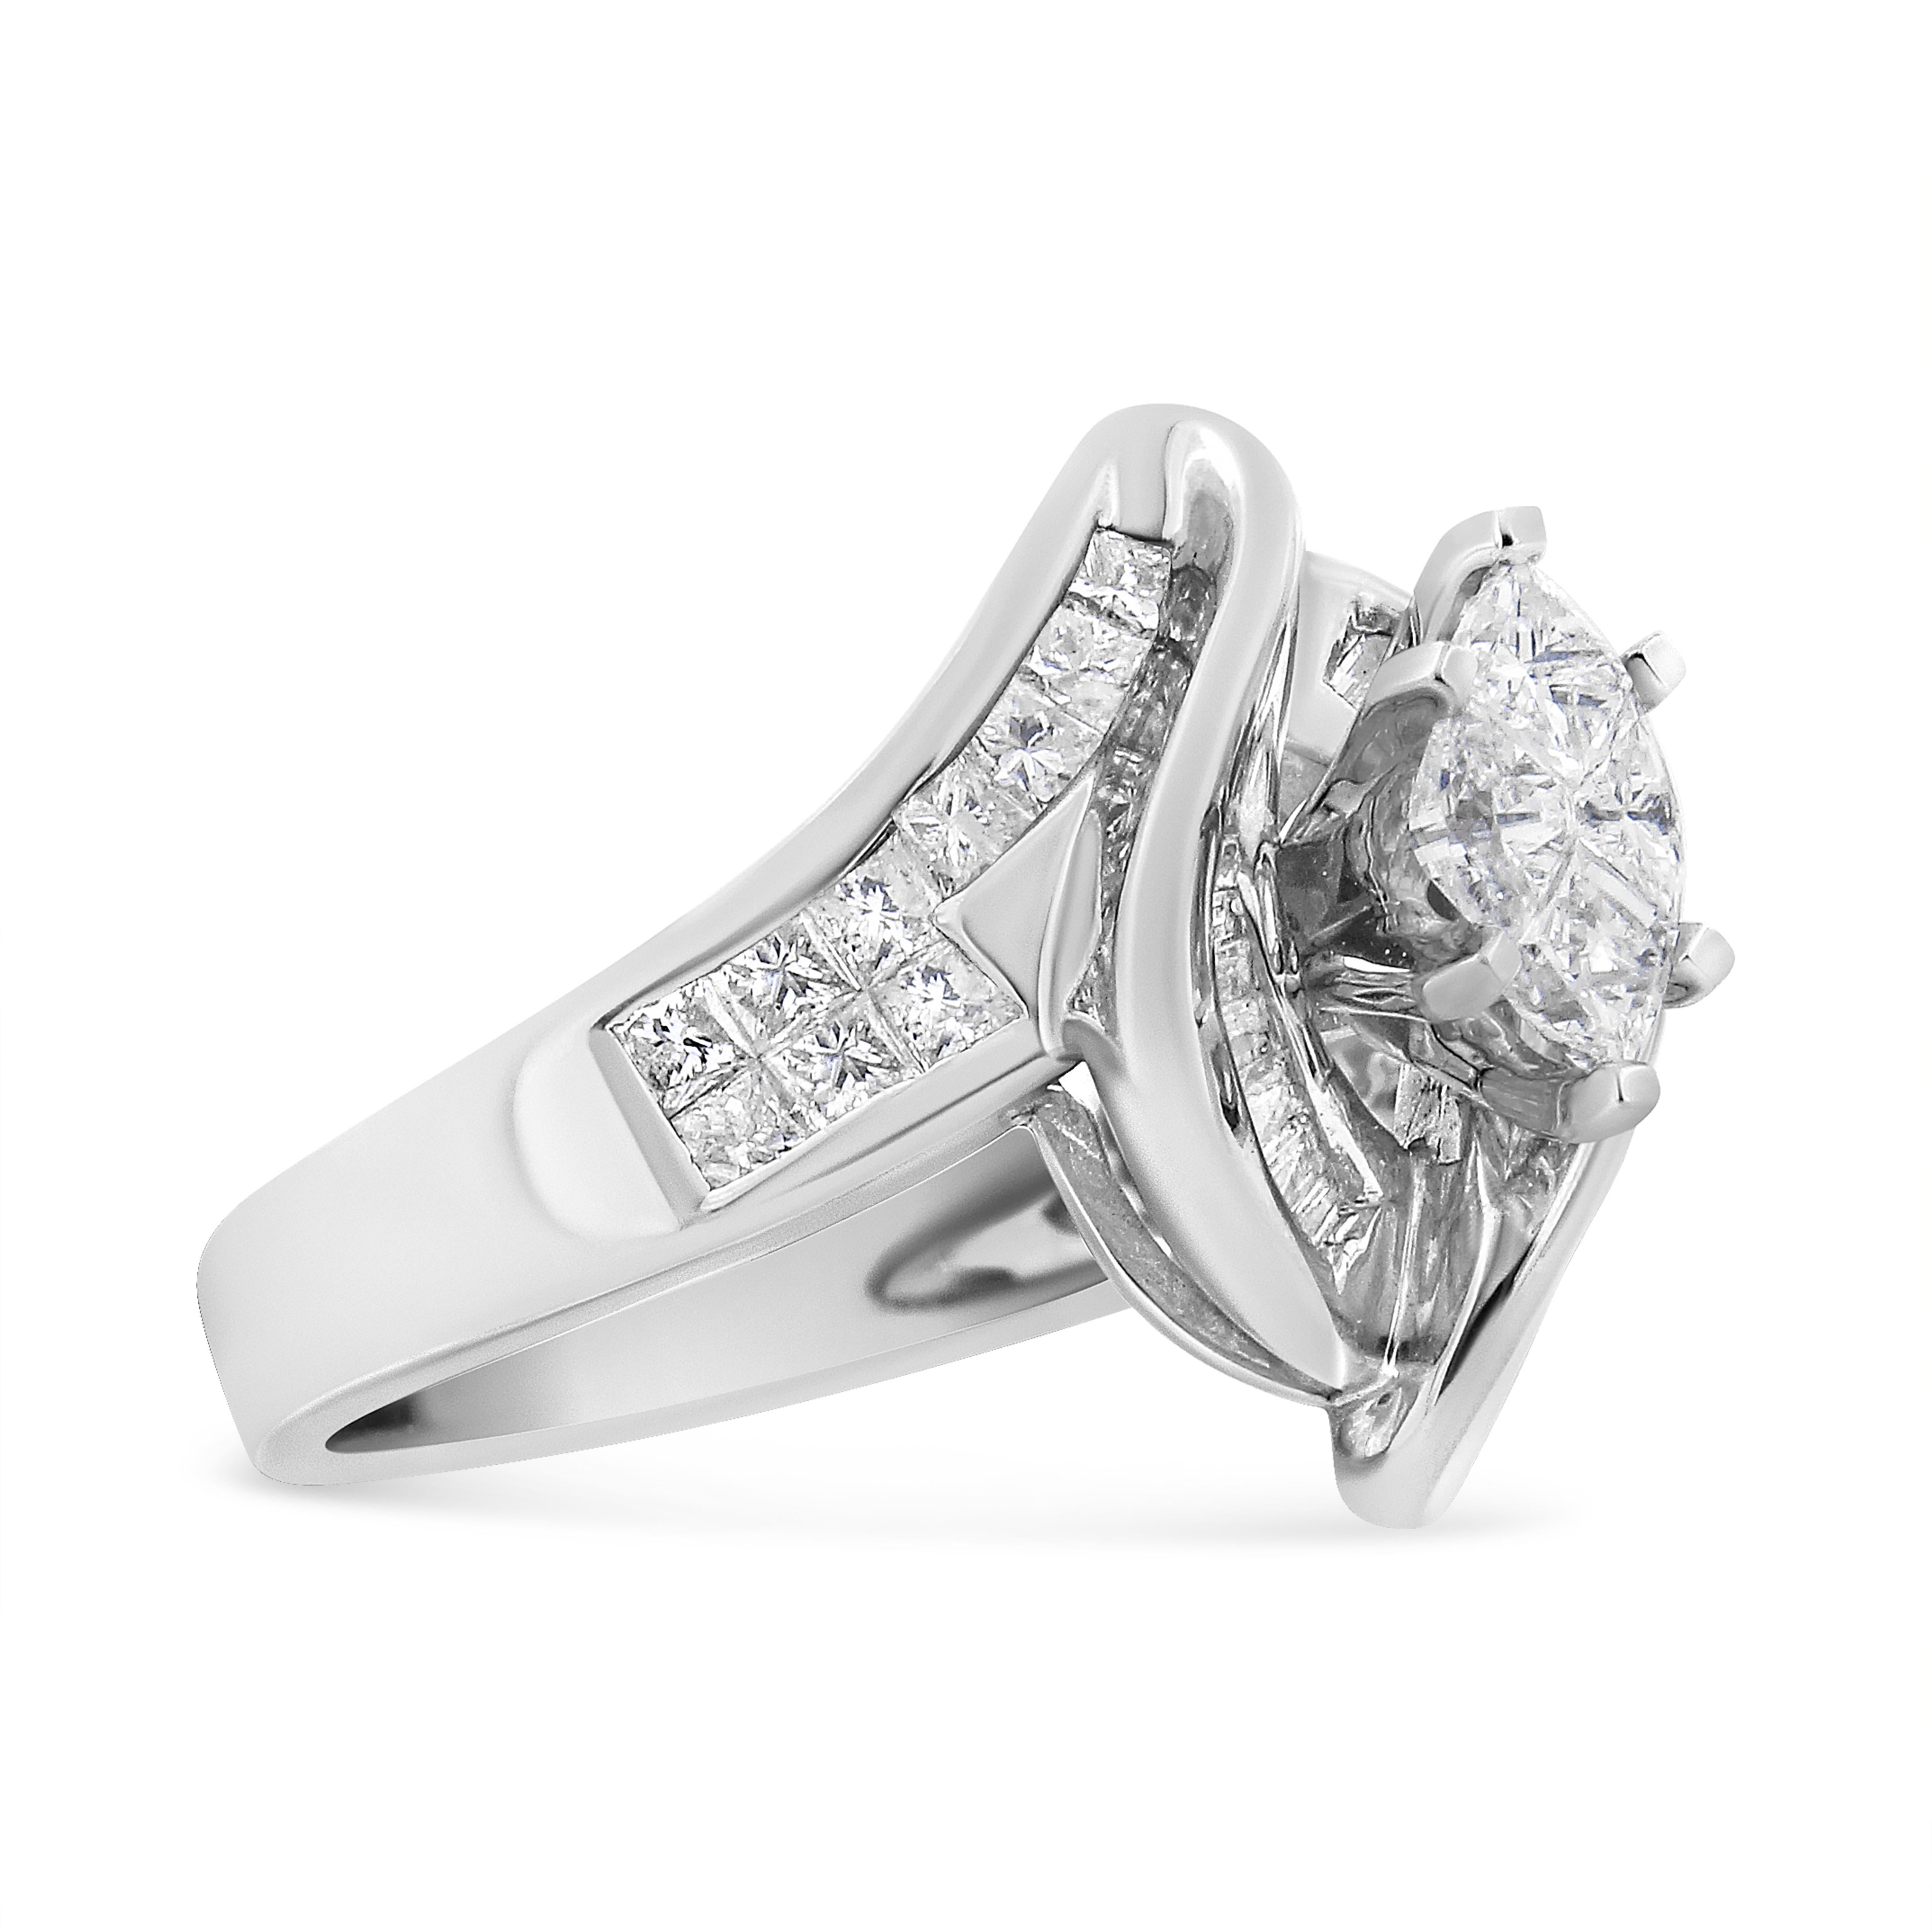 Bold and unique, this cocktail ring has an eye-catching swirl design in gleaming 14k white gold. The silver swirls frame a central cluster of 4 pie-cut diamonds that shine in an elegant prong setting. Baguette and princess-cut diamonds flank the